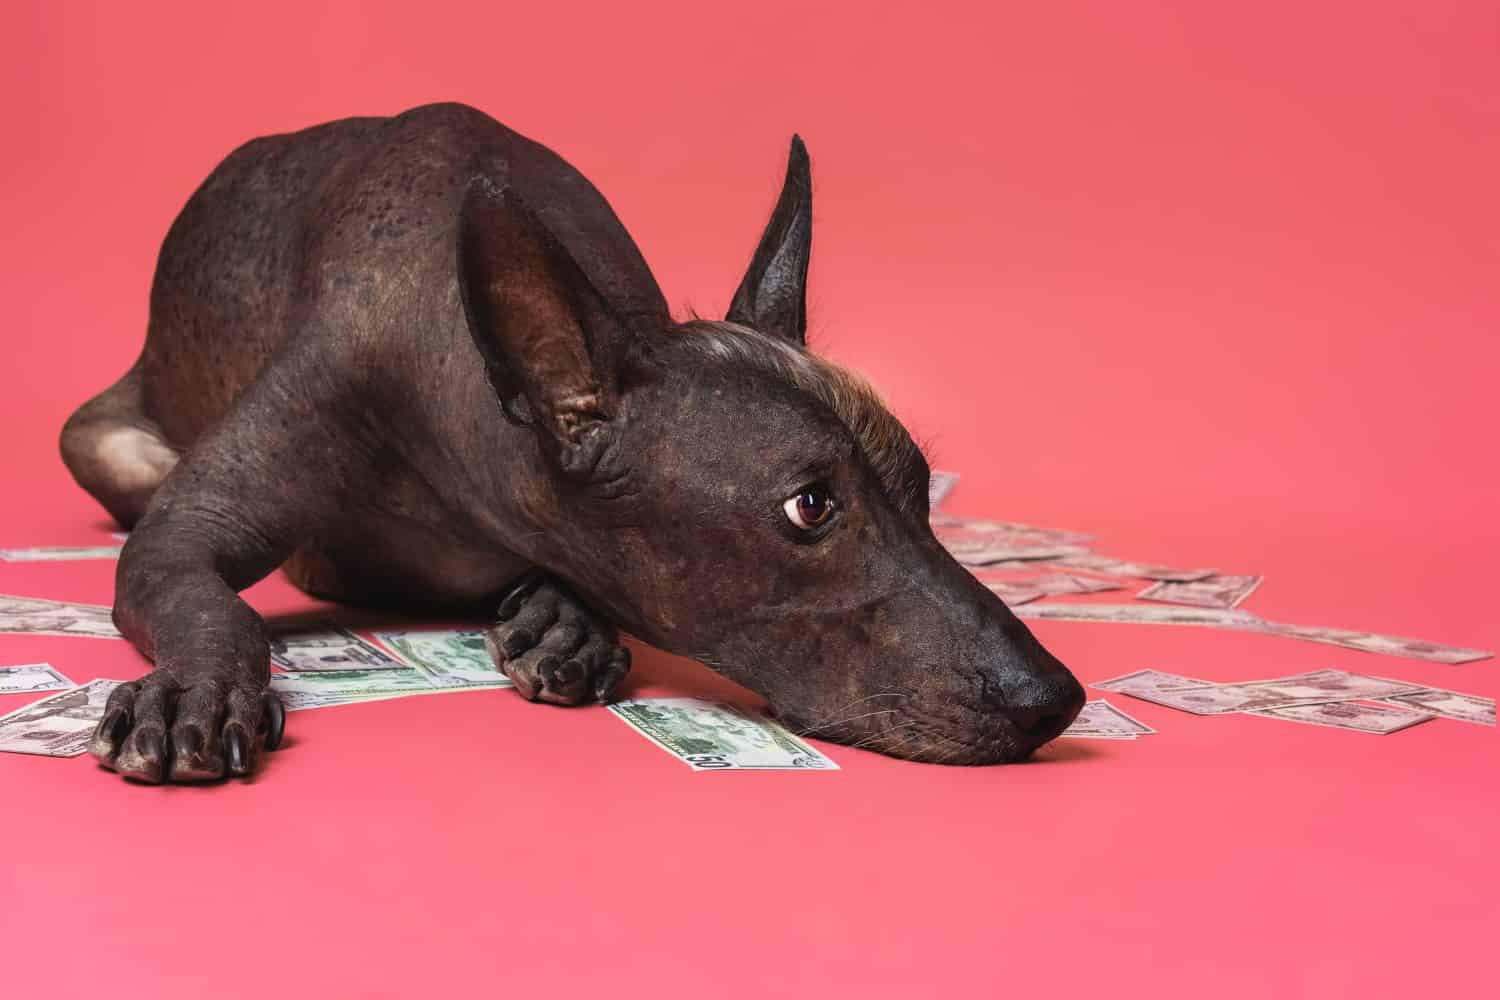 close up portrait of a dog xoloitzcuintle breed lies on a pile of American dollars money on a pink background. Wealth